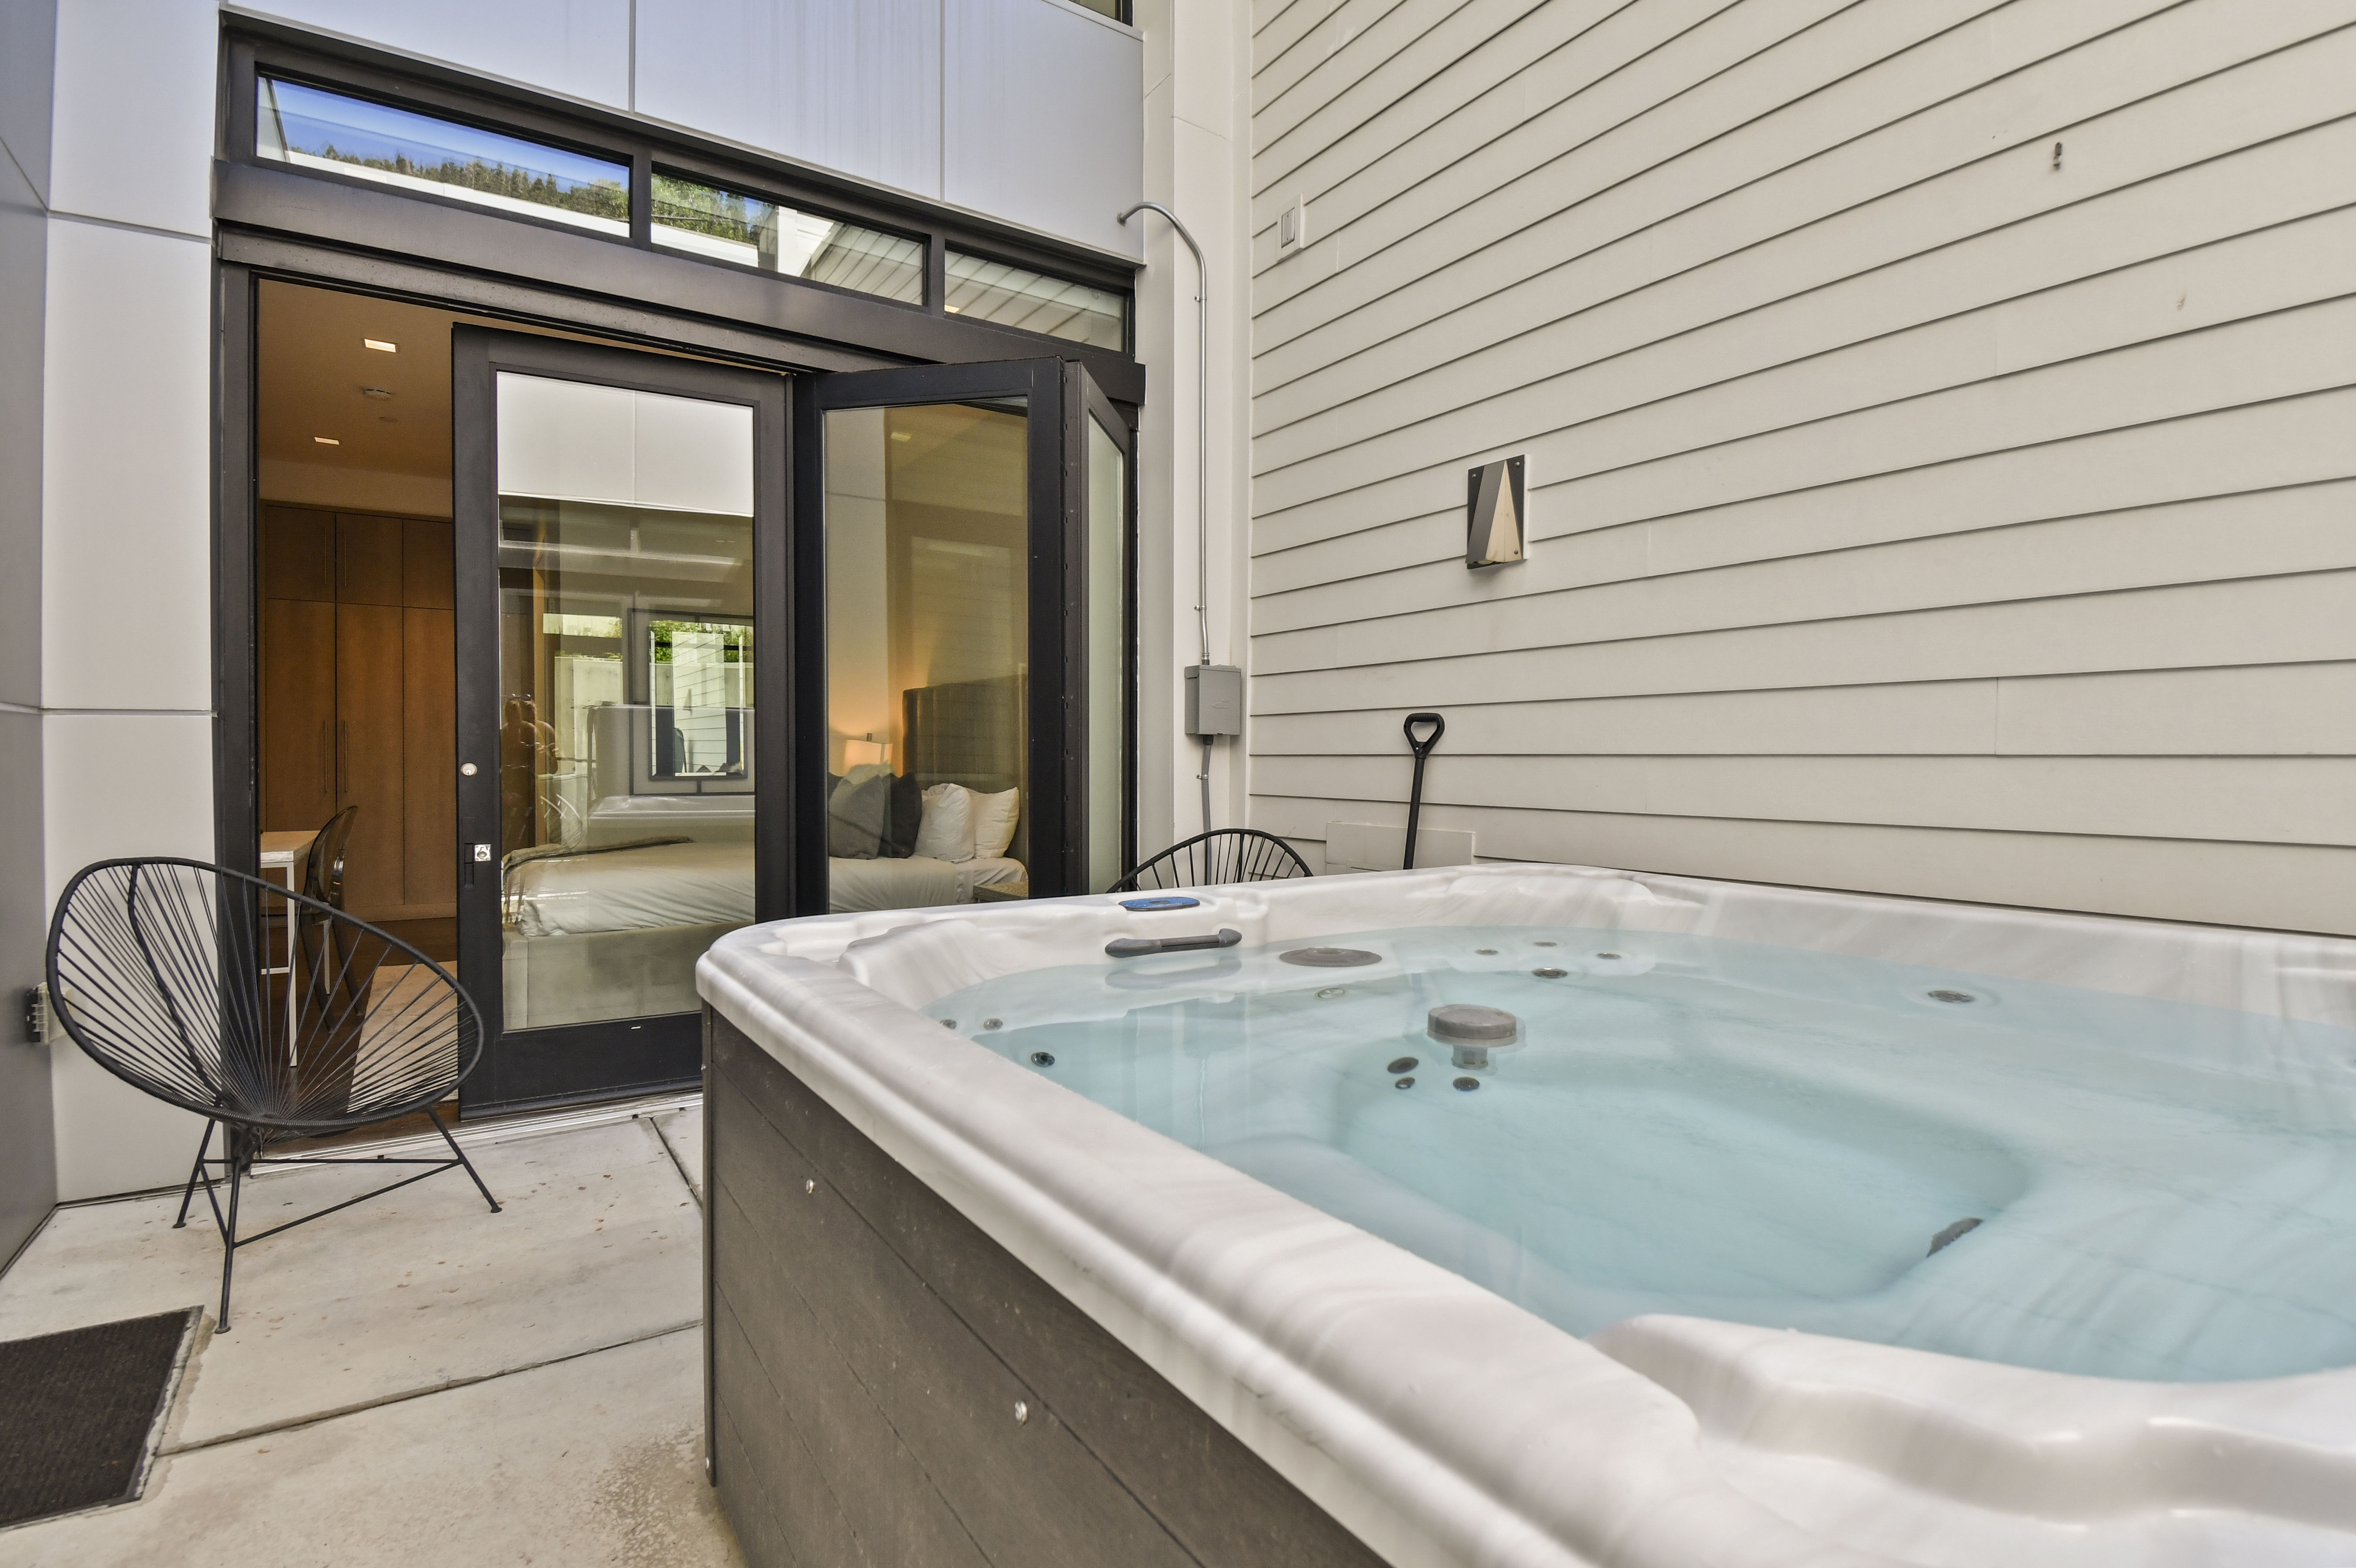 Private hot tub provides maximum privacy, surrounded by the walls of your own condo.